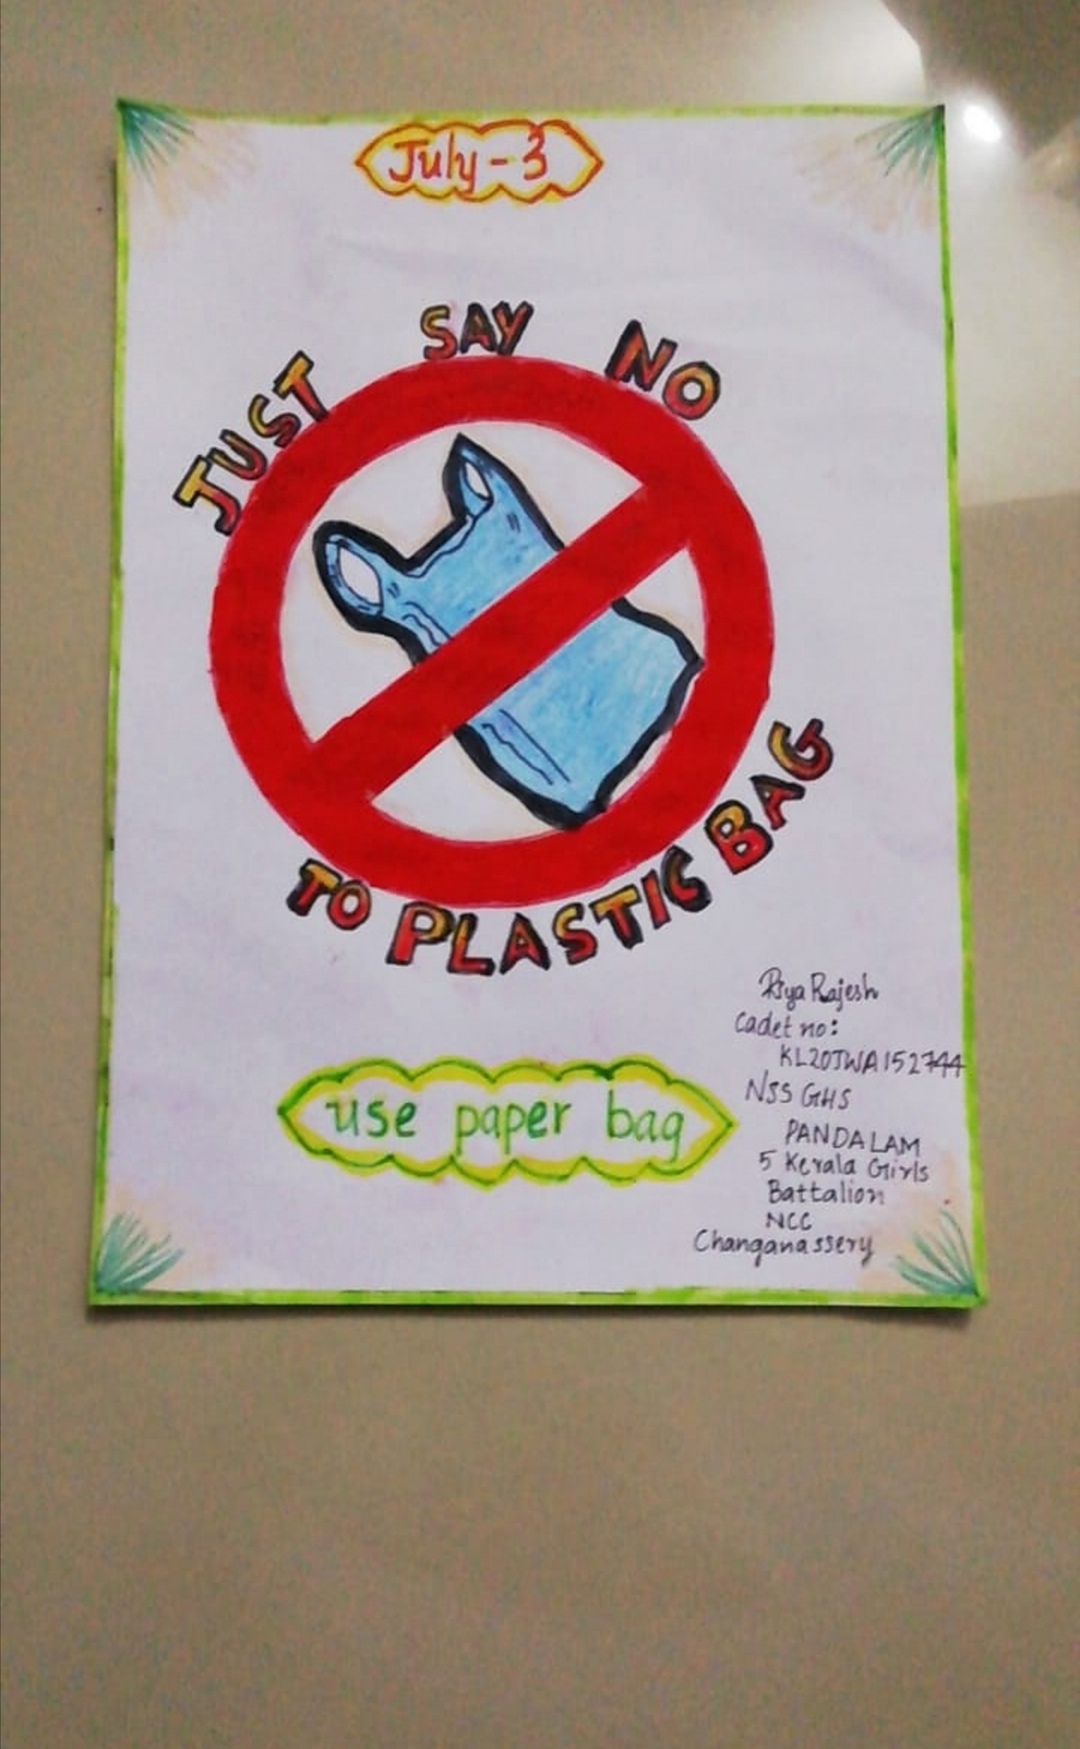 Share 88+ no plastic bags poster best - in.duhocakina